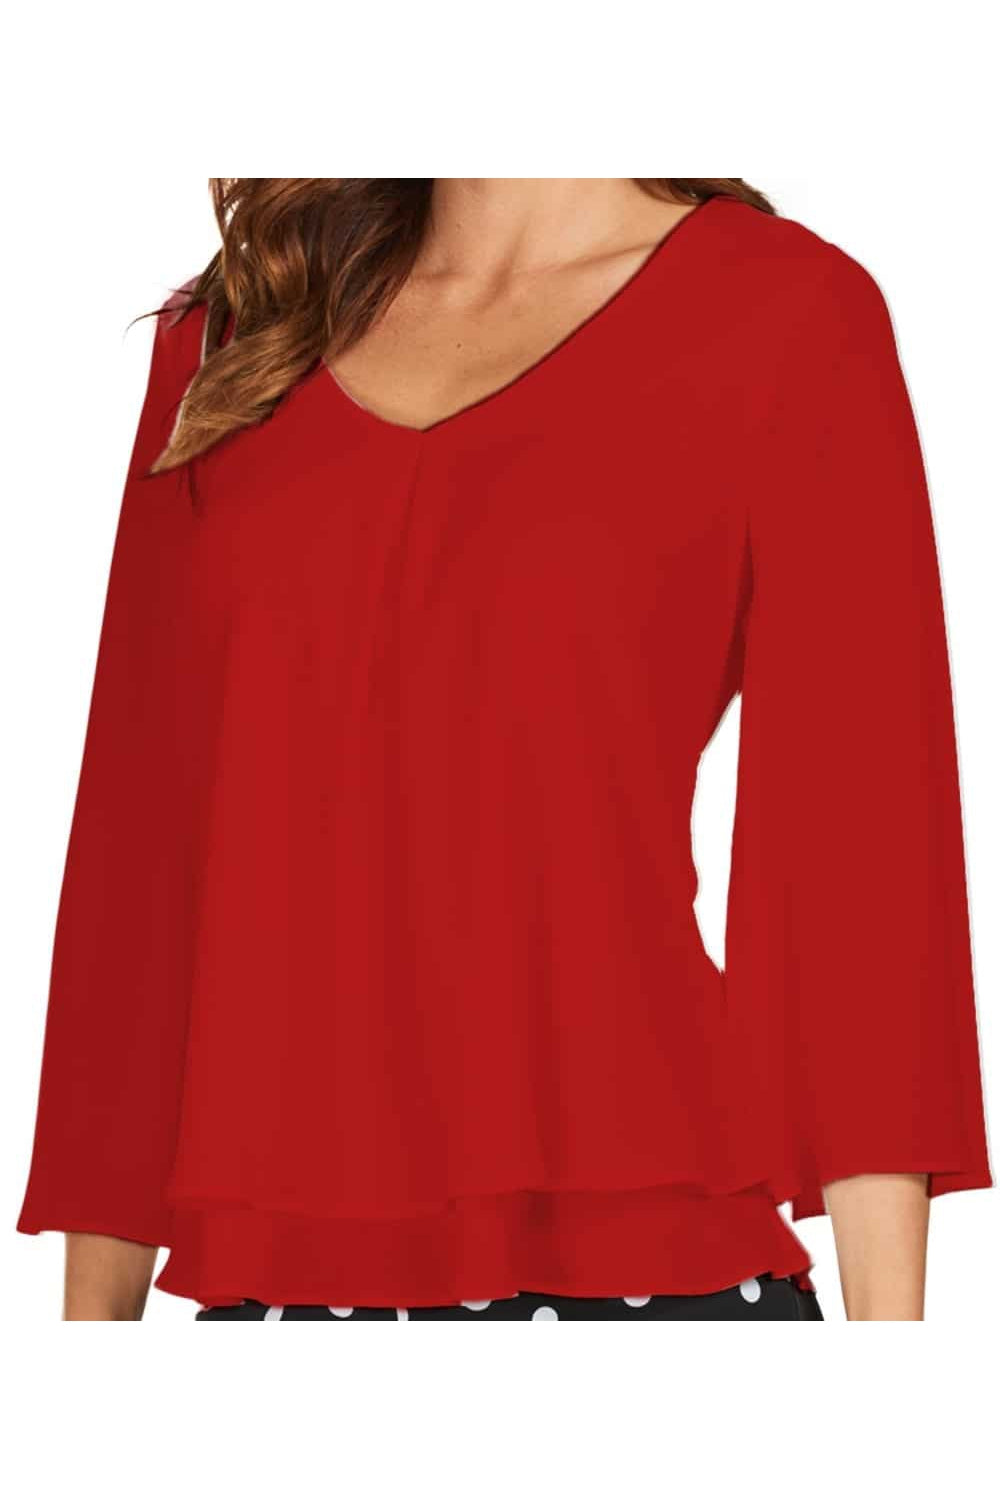 Frank Lyman Top Style 176335-Rd Rot Belle Mia Boutique